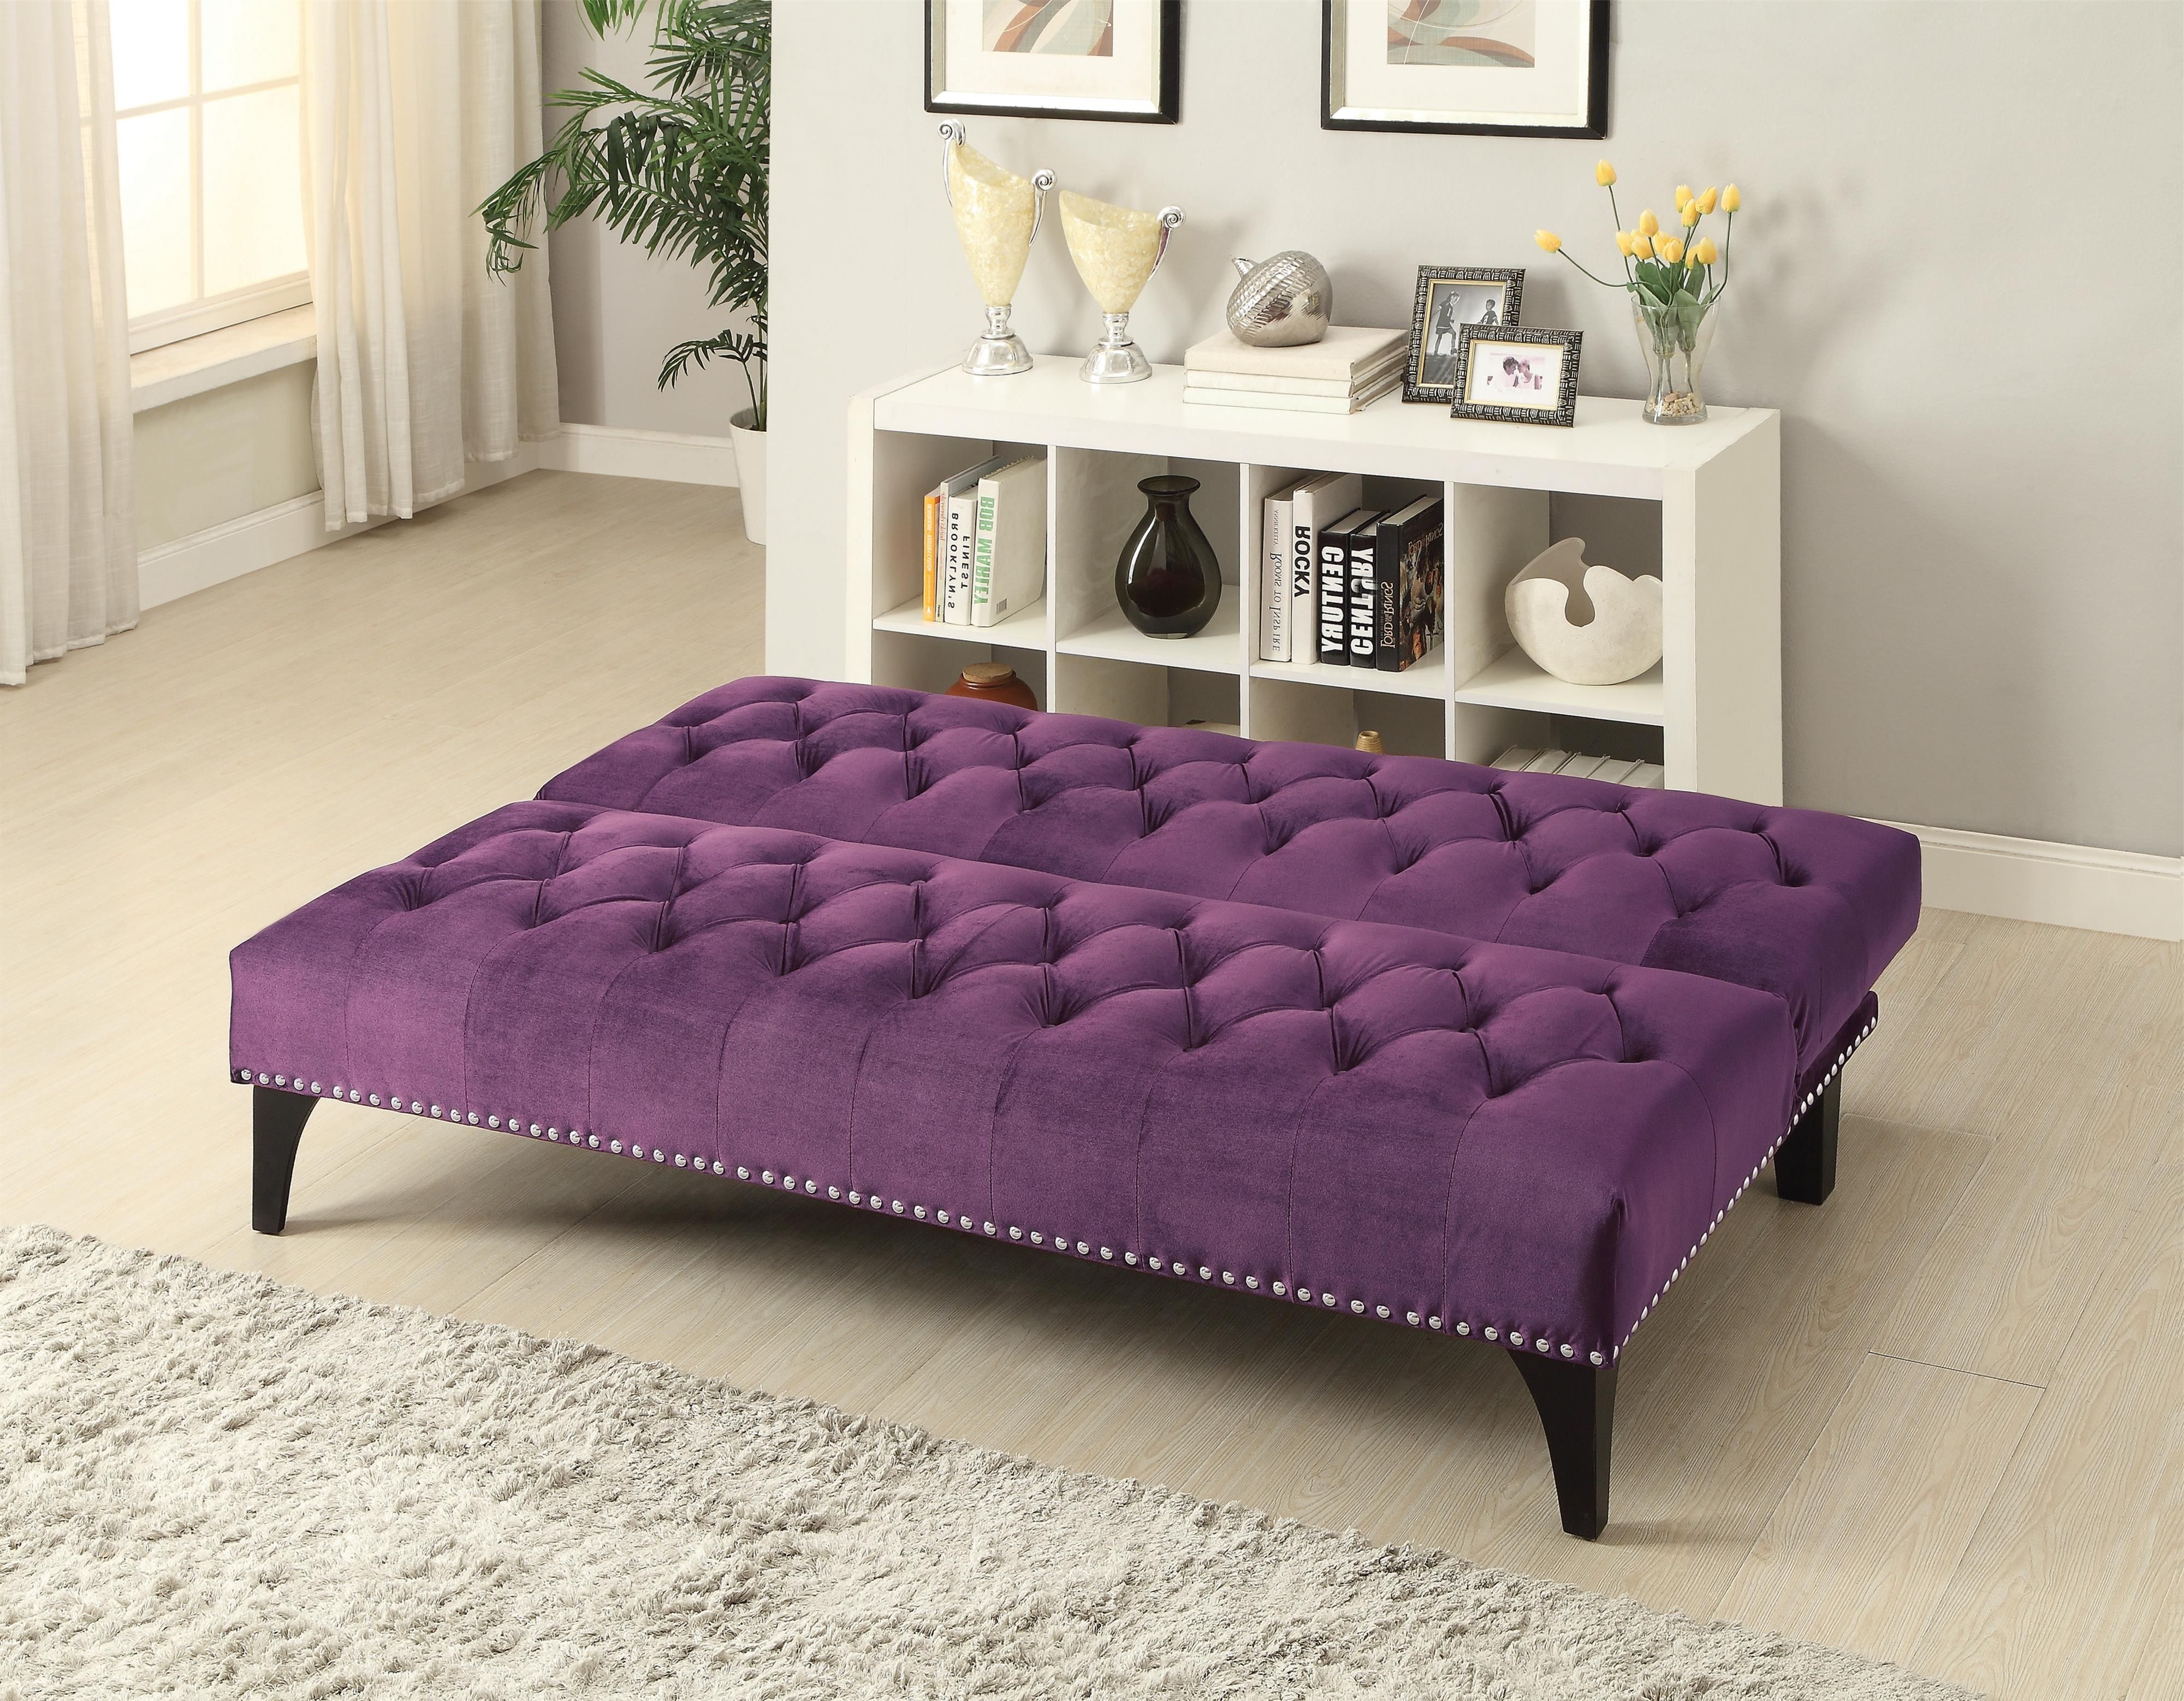 Most Popular Sofa Beds And Futons Transitional Sofa Bed With Velvet Upholstery Pertaining To Velvet Purple Sofas (View 8 of 20)